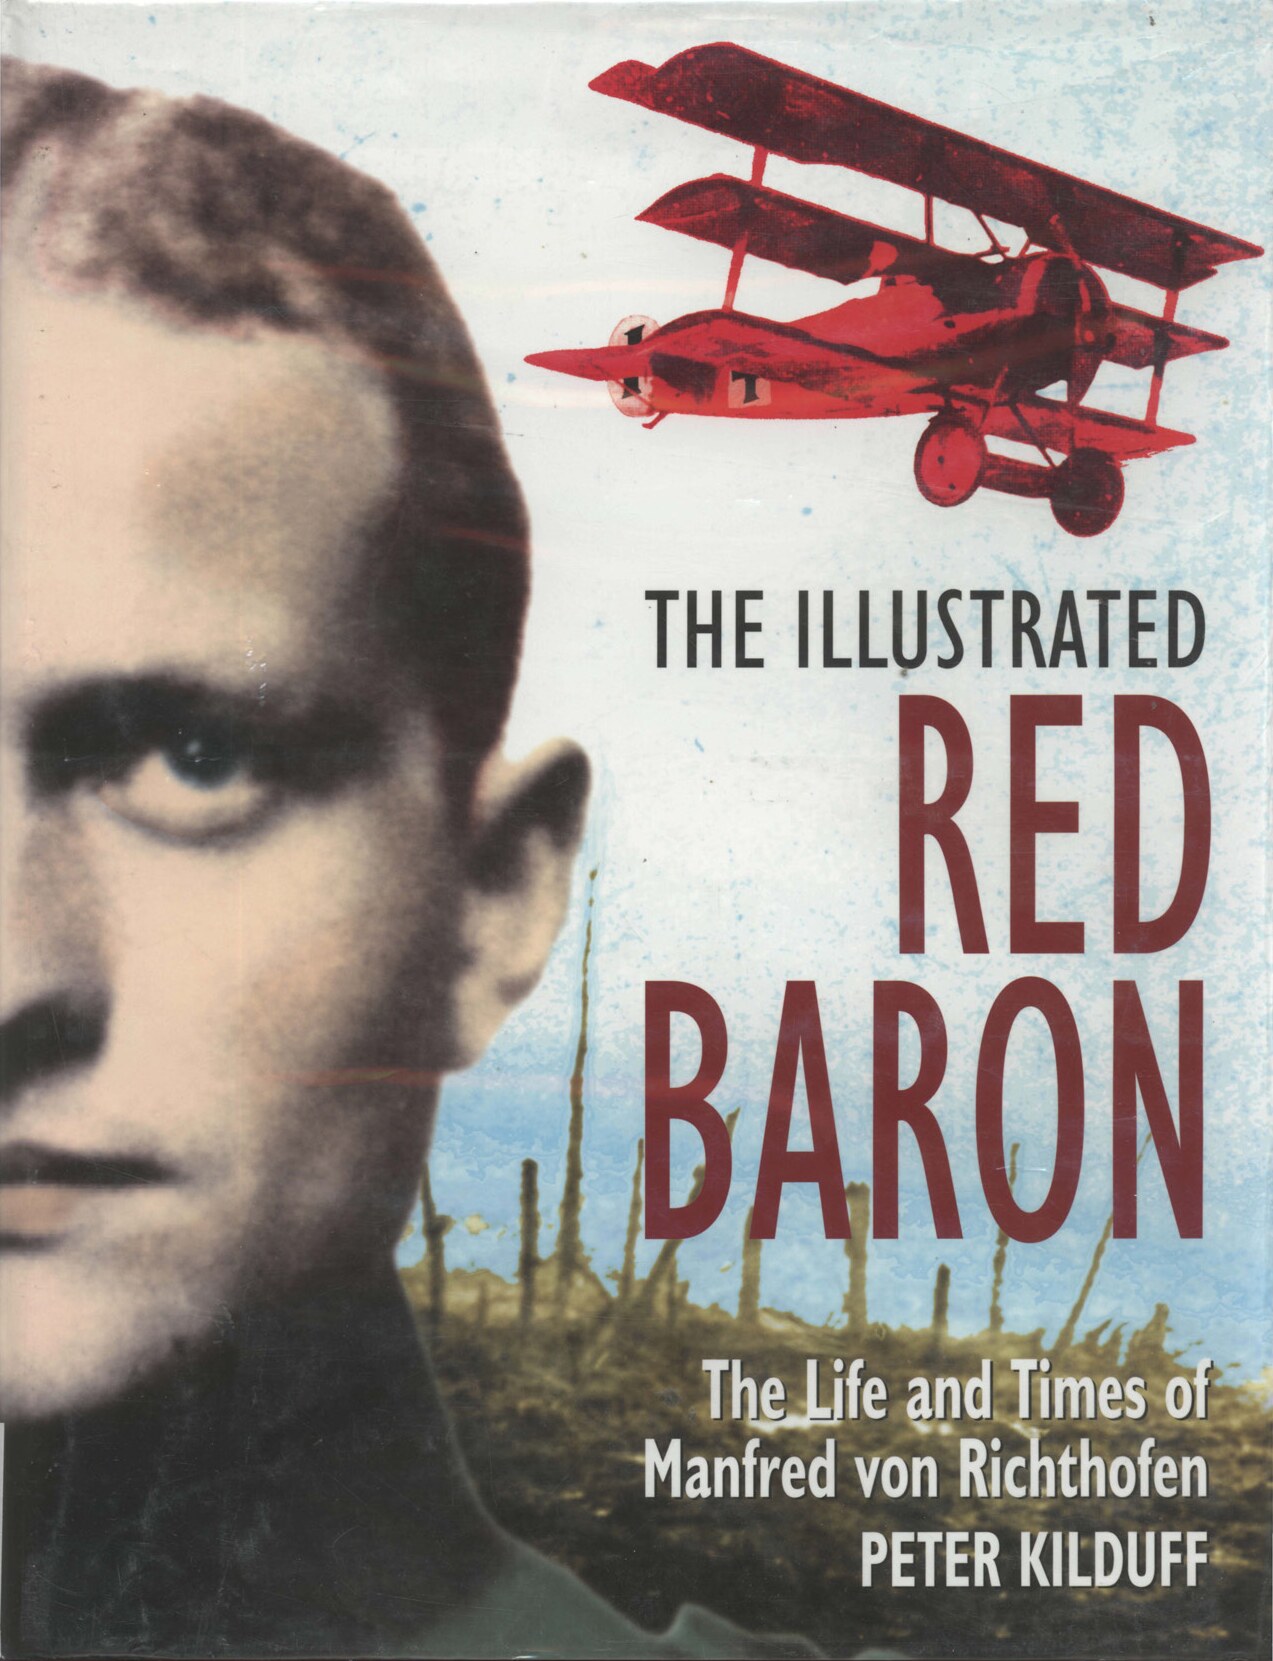 The Illustrated Red Baron - The Life and Times of Manfred von Richthofen